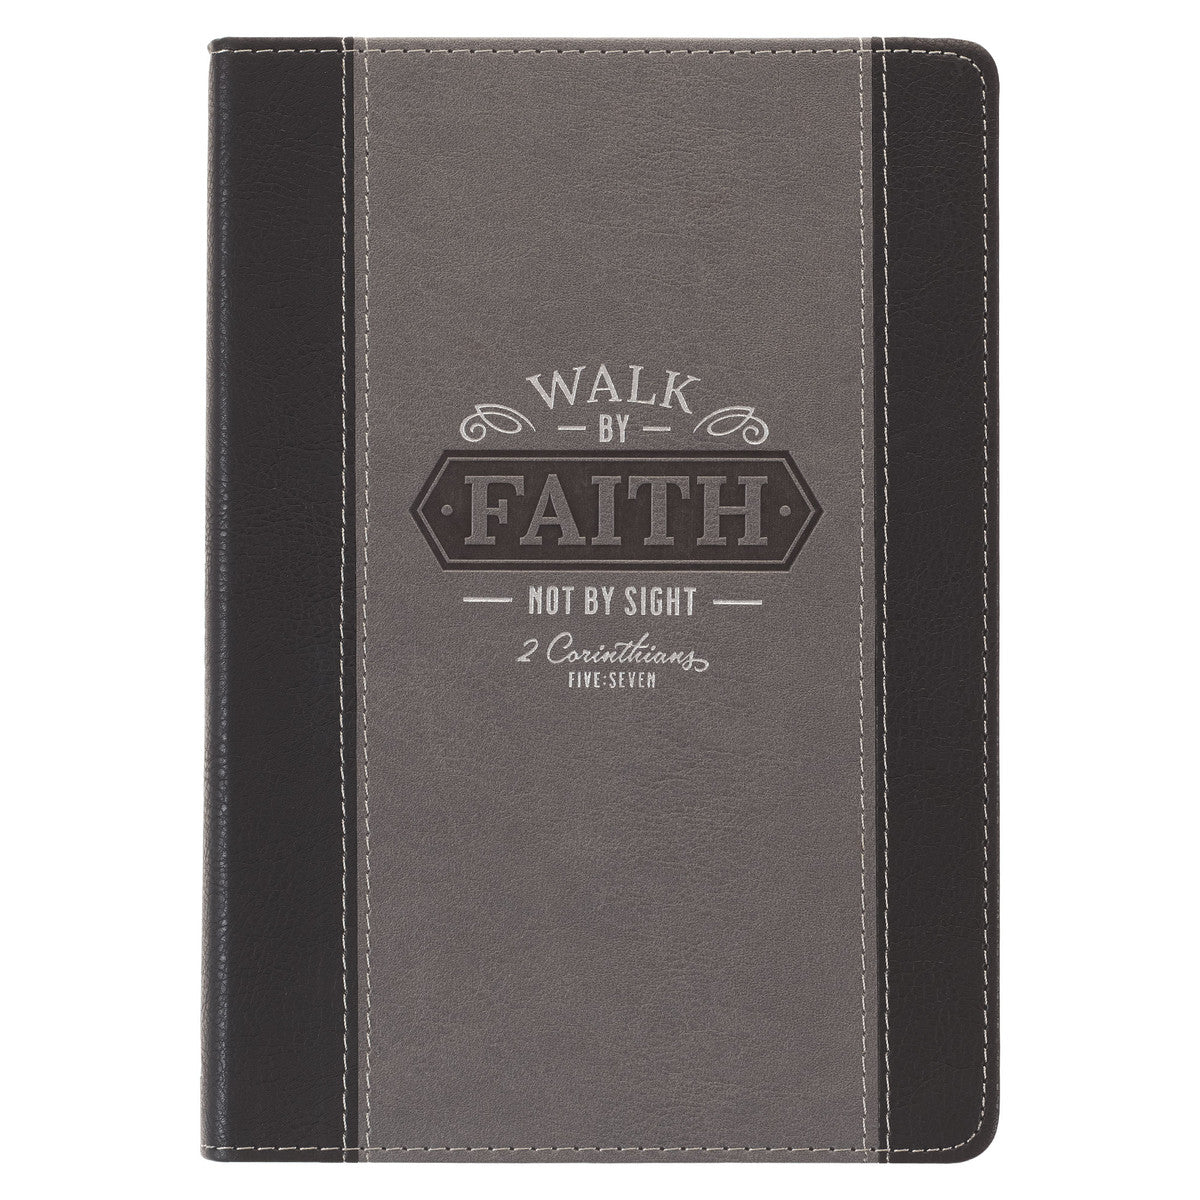 Walk by Faith Black and Grey Faux Leather Classic Journal - 2 Corinthians 5:7 - The Christian Gift Company